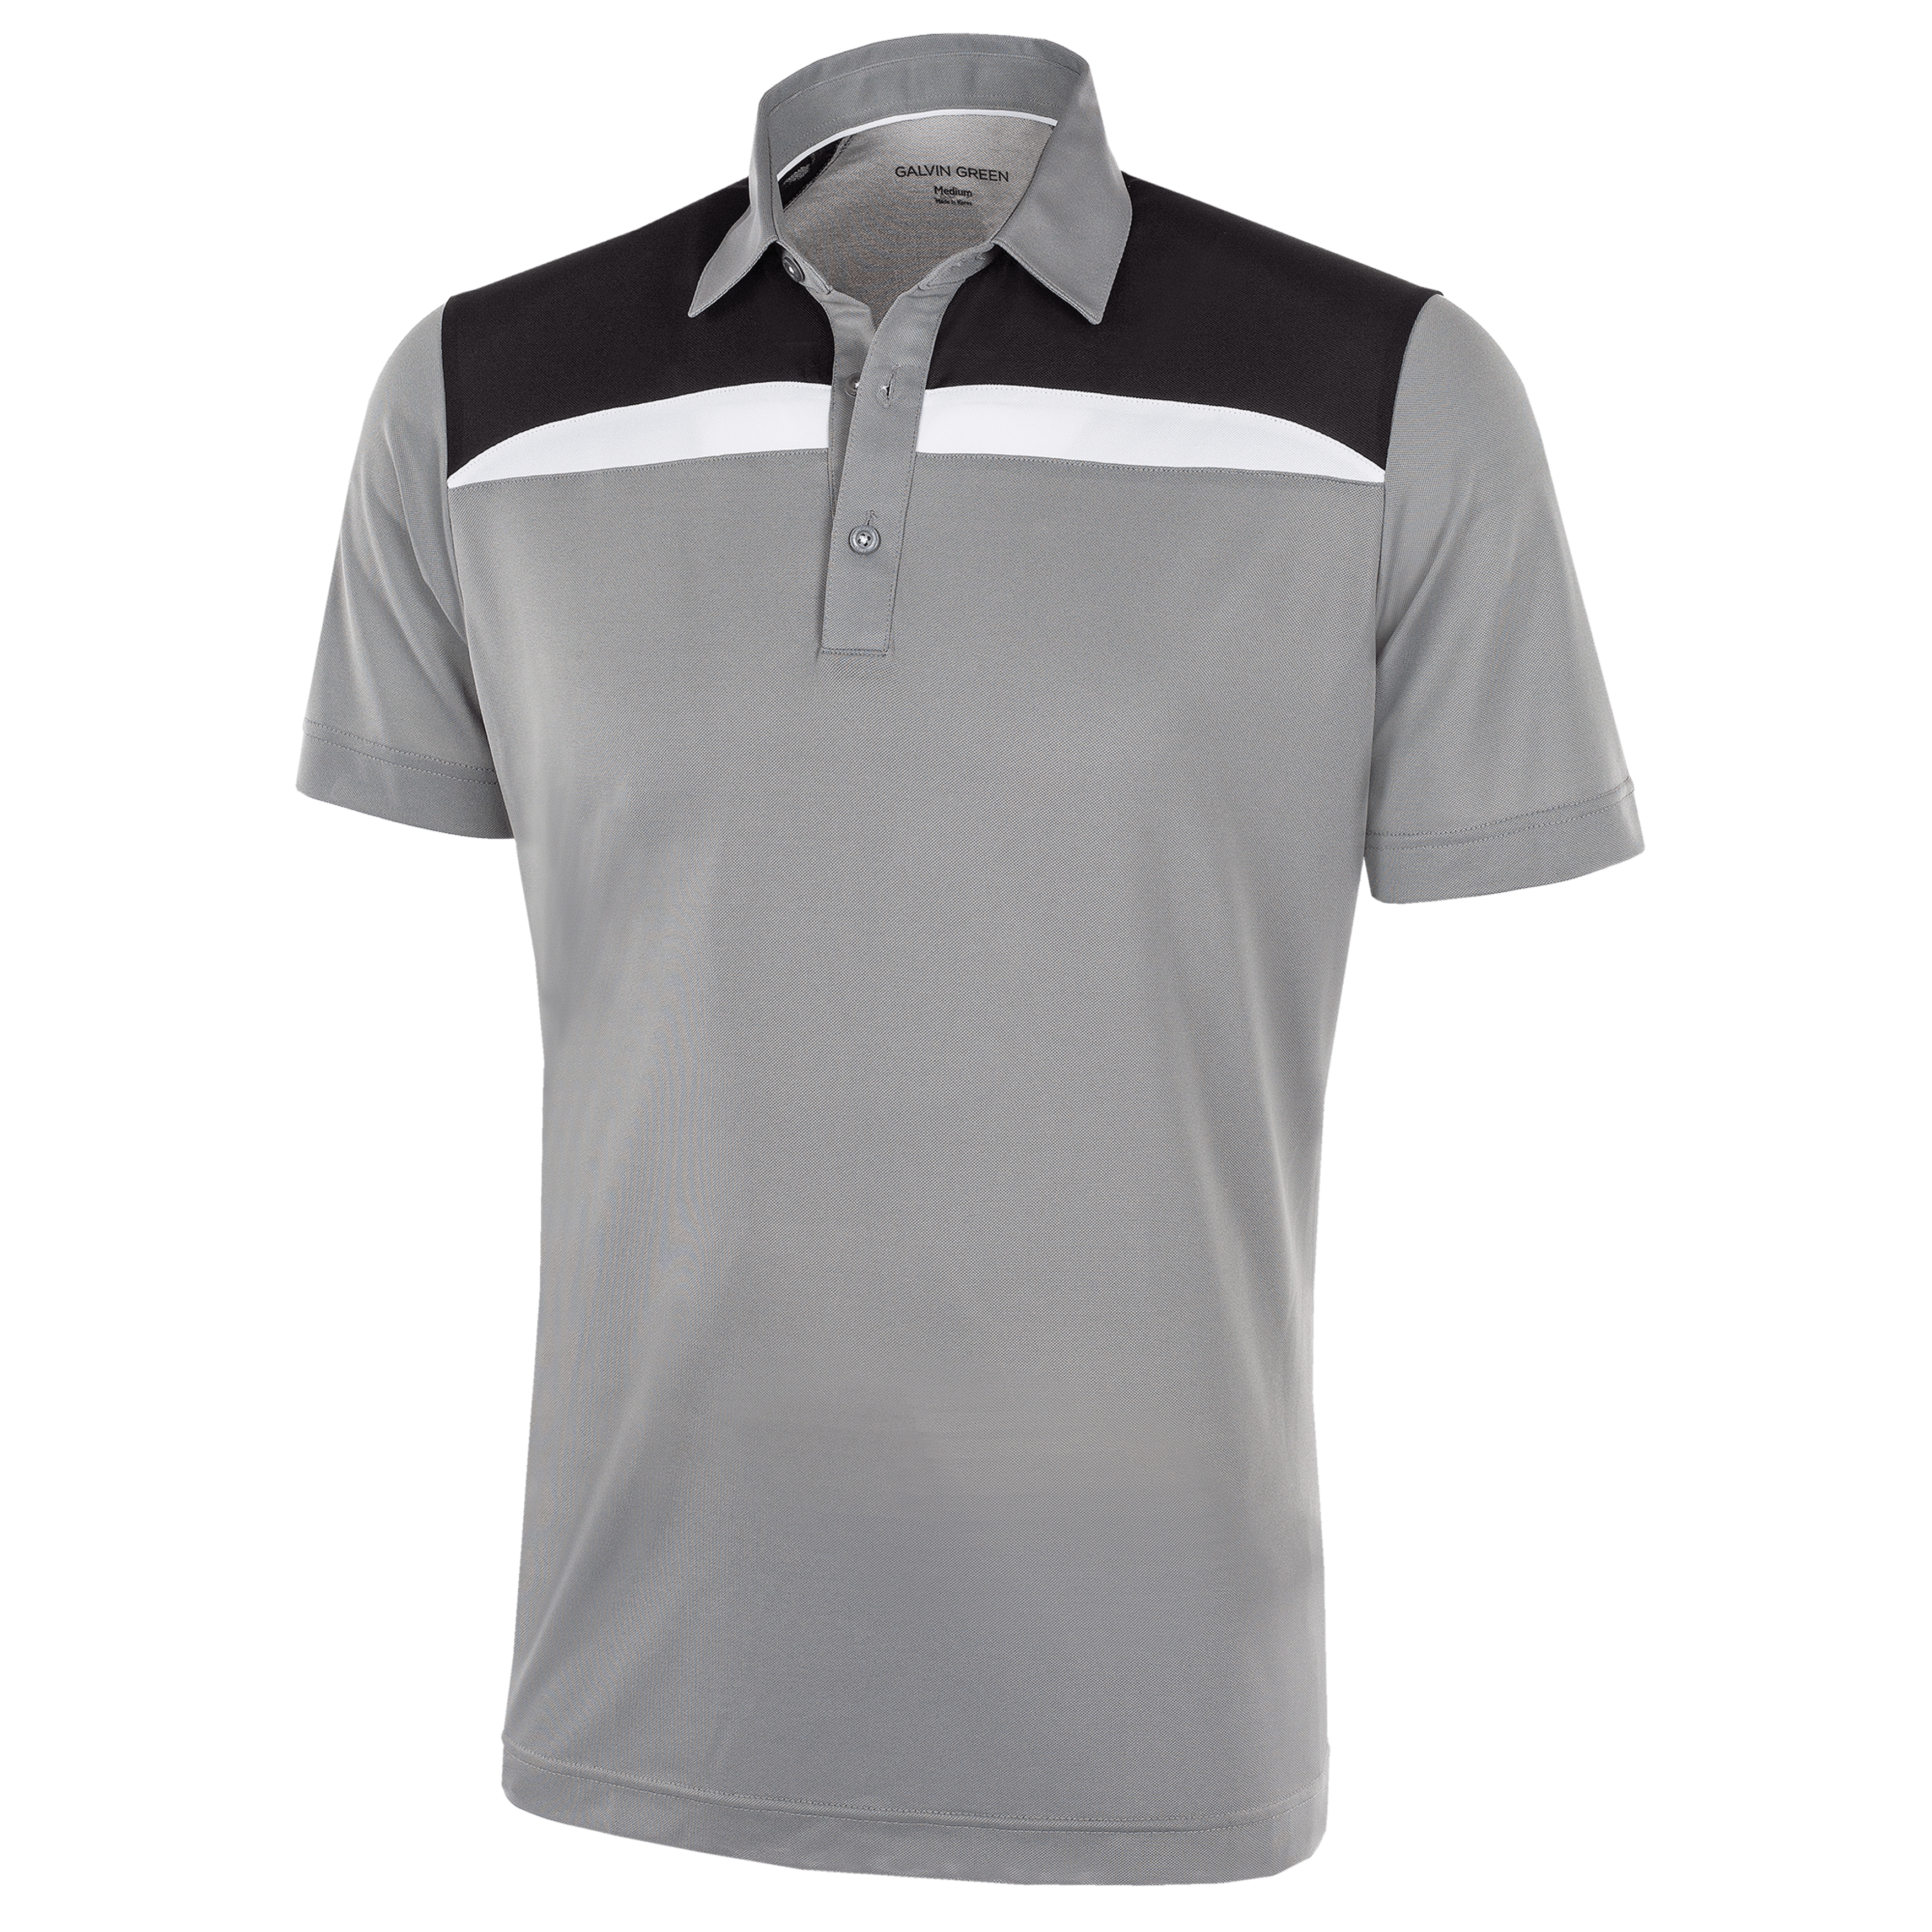 Galvin Green Mapping Ventil8 Plus Polo Shirt